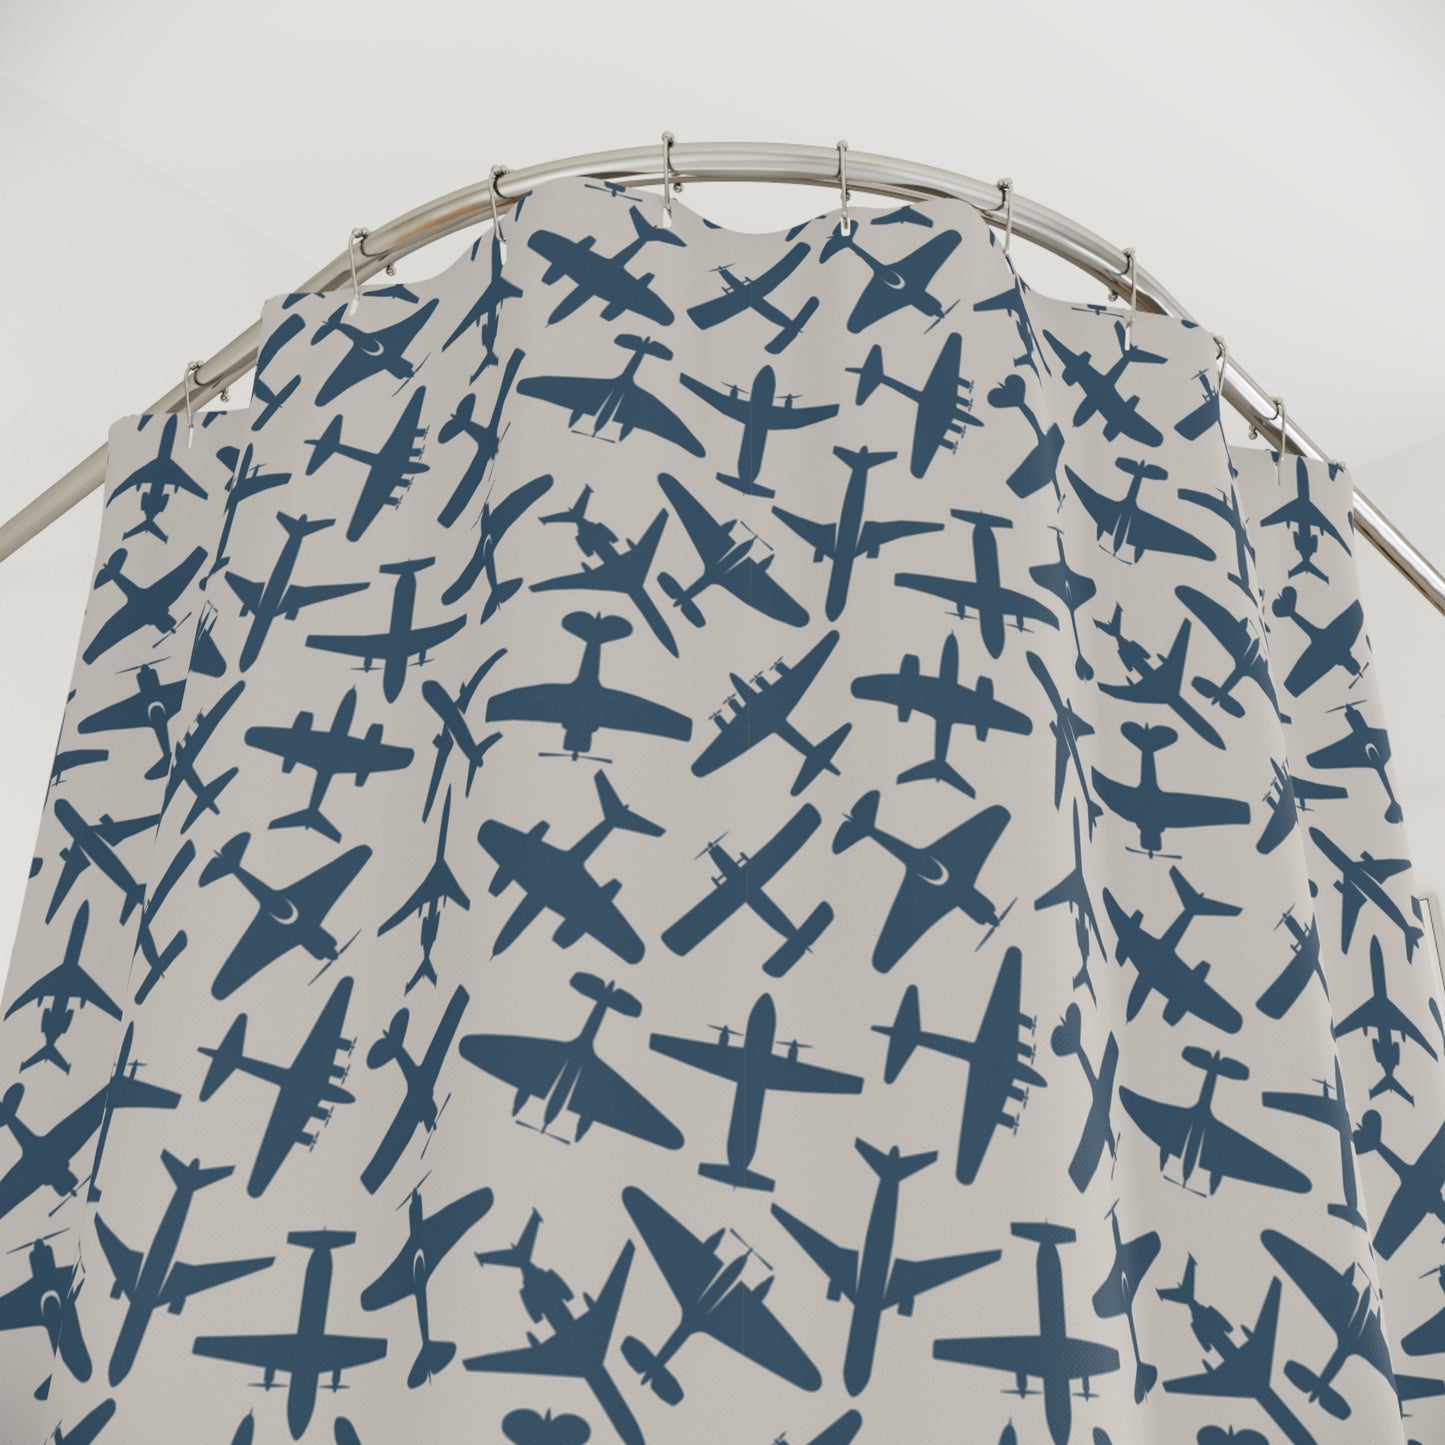 aviation merchandise, airplane patterned shower curtain, close up